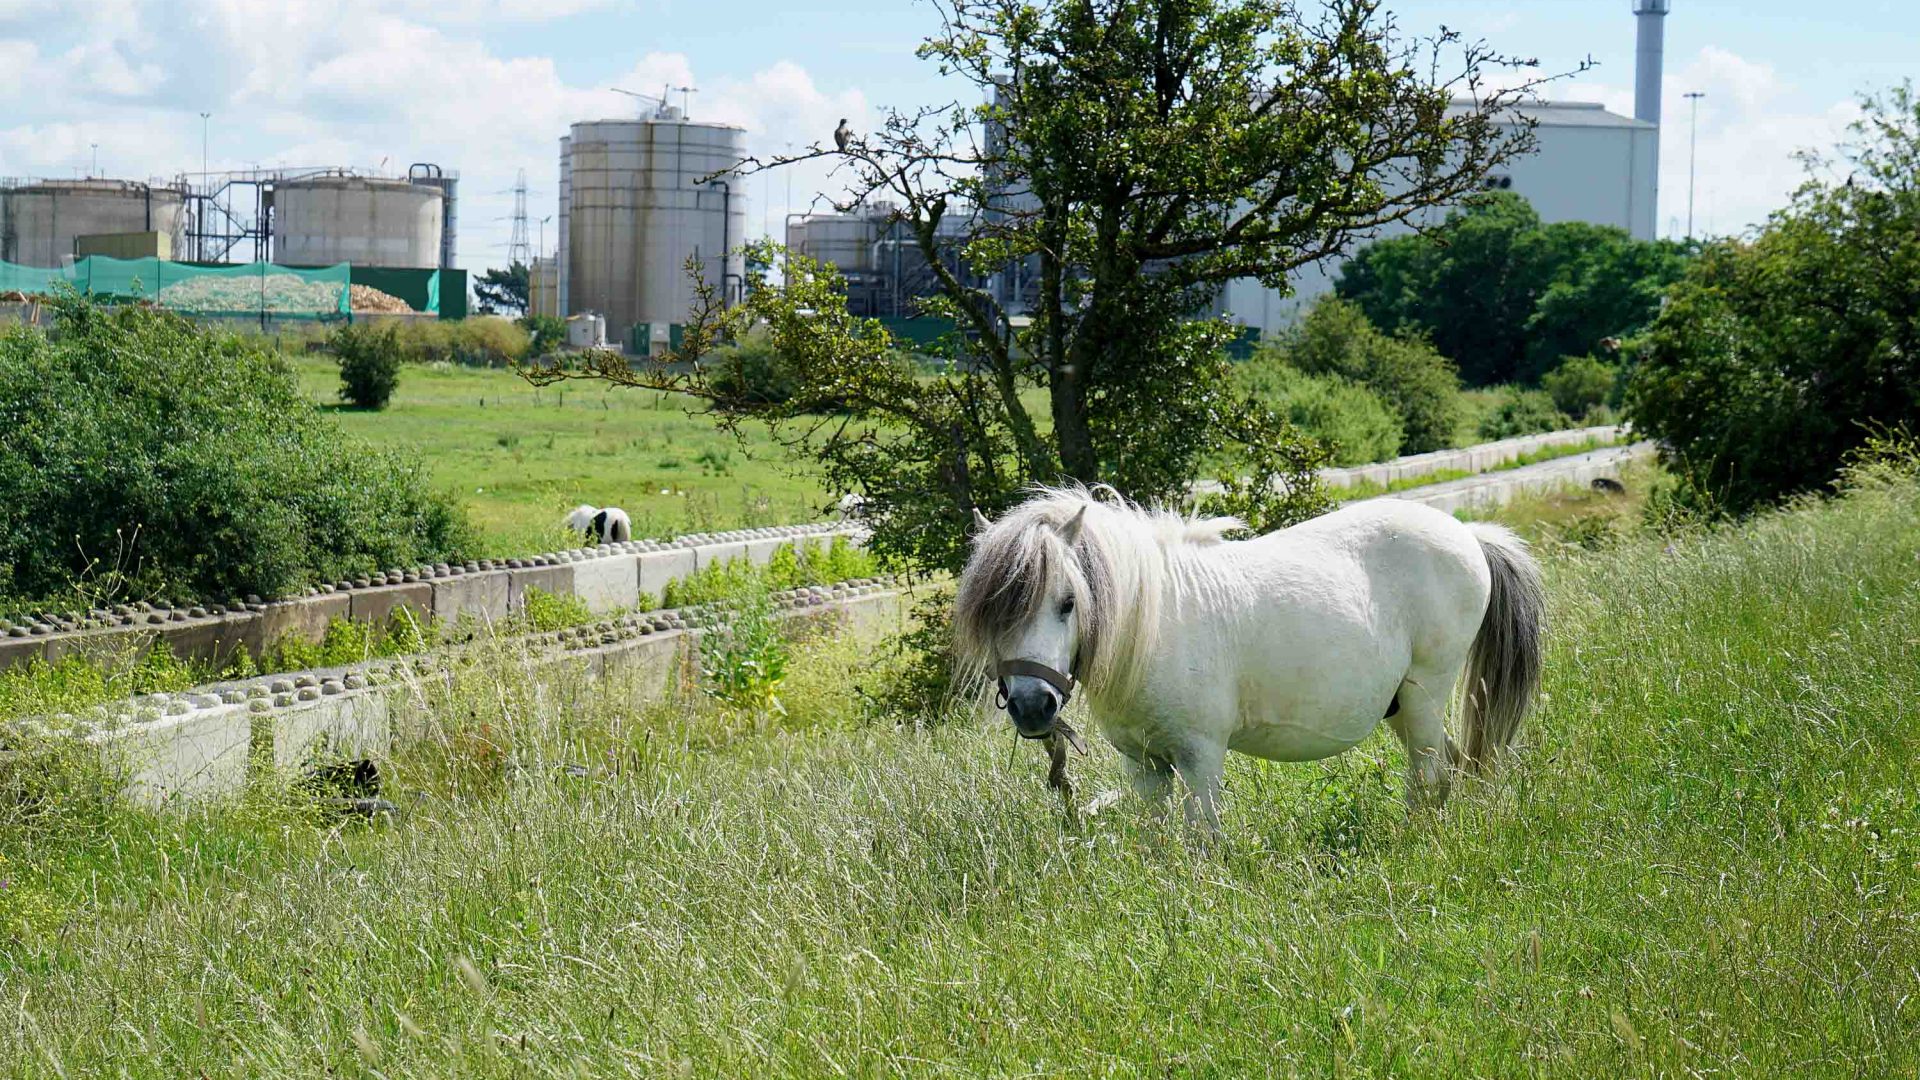 A pony on a hill overlooking buildings.